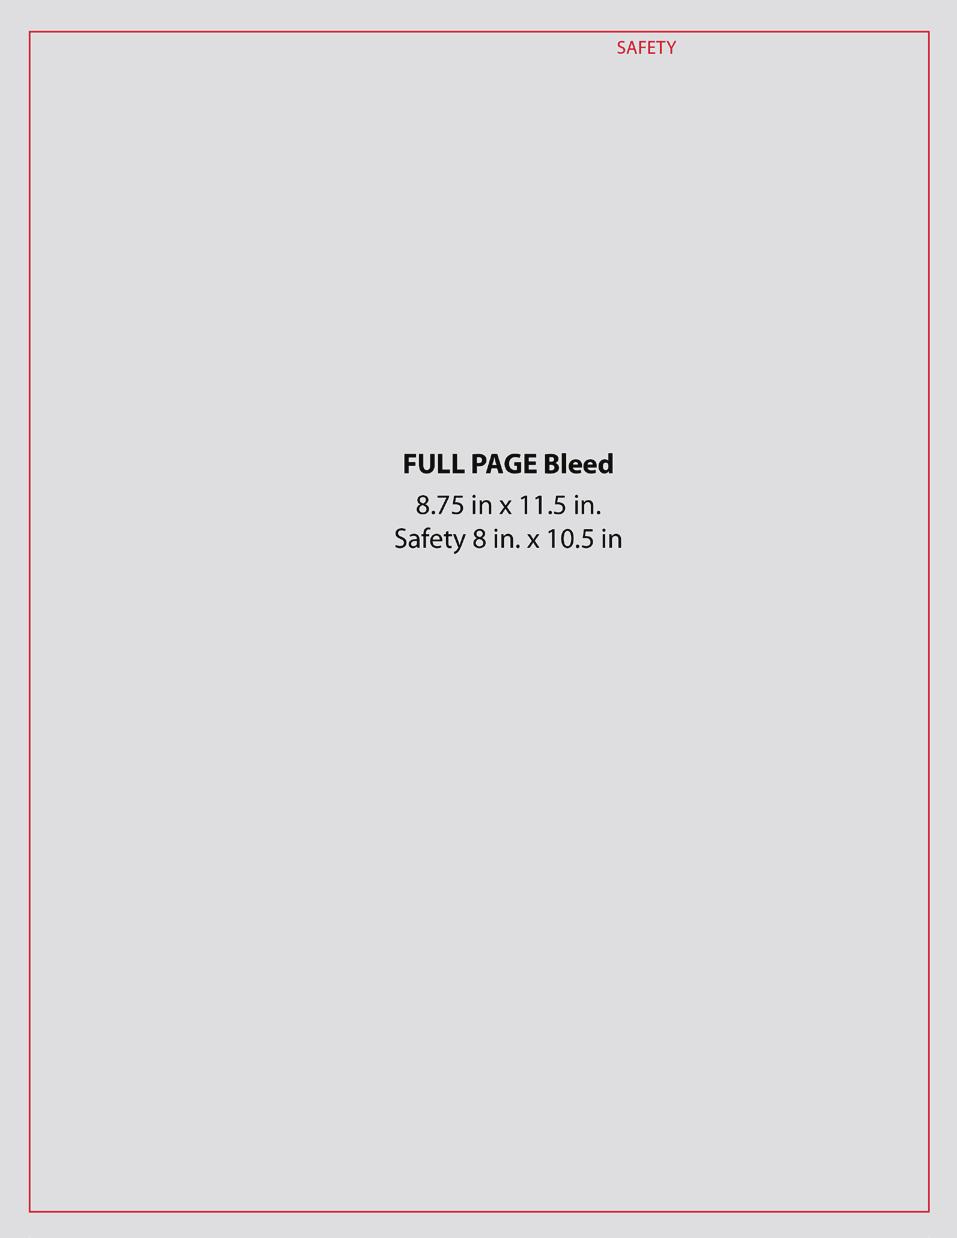 Advertising Specifcations WIDTH HEIGHT Full Page Bleed 8.75 in. 11.5 in. Live Area (safety) 8 in 10.5 in. Full Page (non-bleed) 7.5 in 10 in. 1/2 page Horizontal 7.5 in. 4.875 in. 1/2 Page Vertical 3.